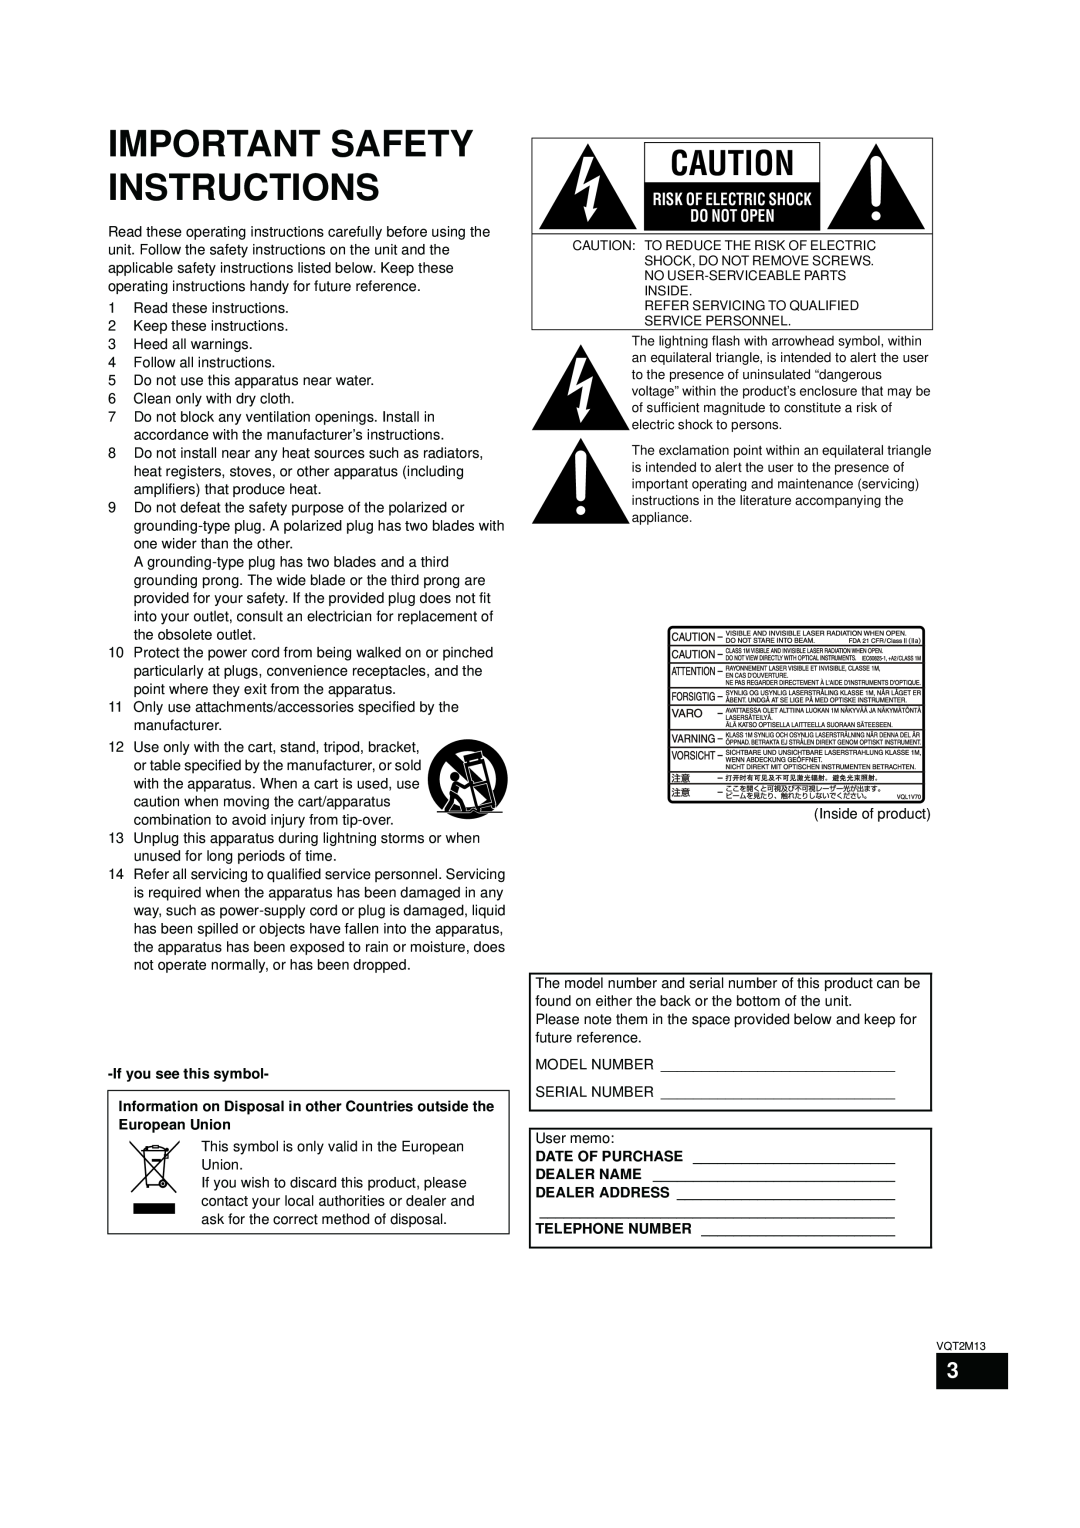 Panasonic SC-BT330, SC-BT730 operating instructions Important Safety Instructions, Risk Of Electric Shock Do Not Open 